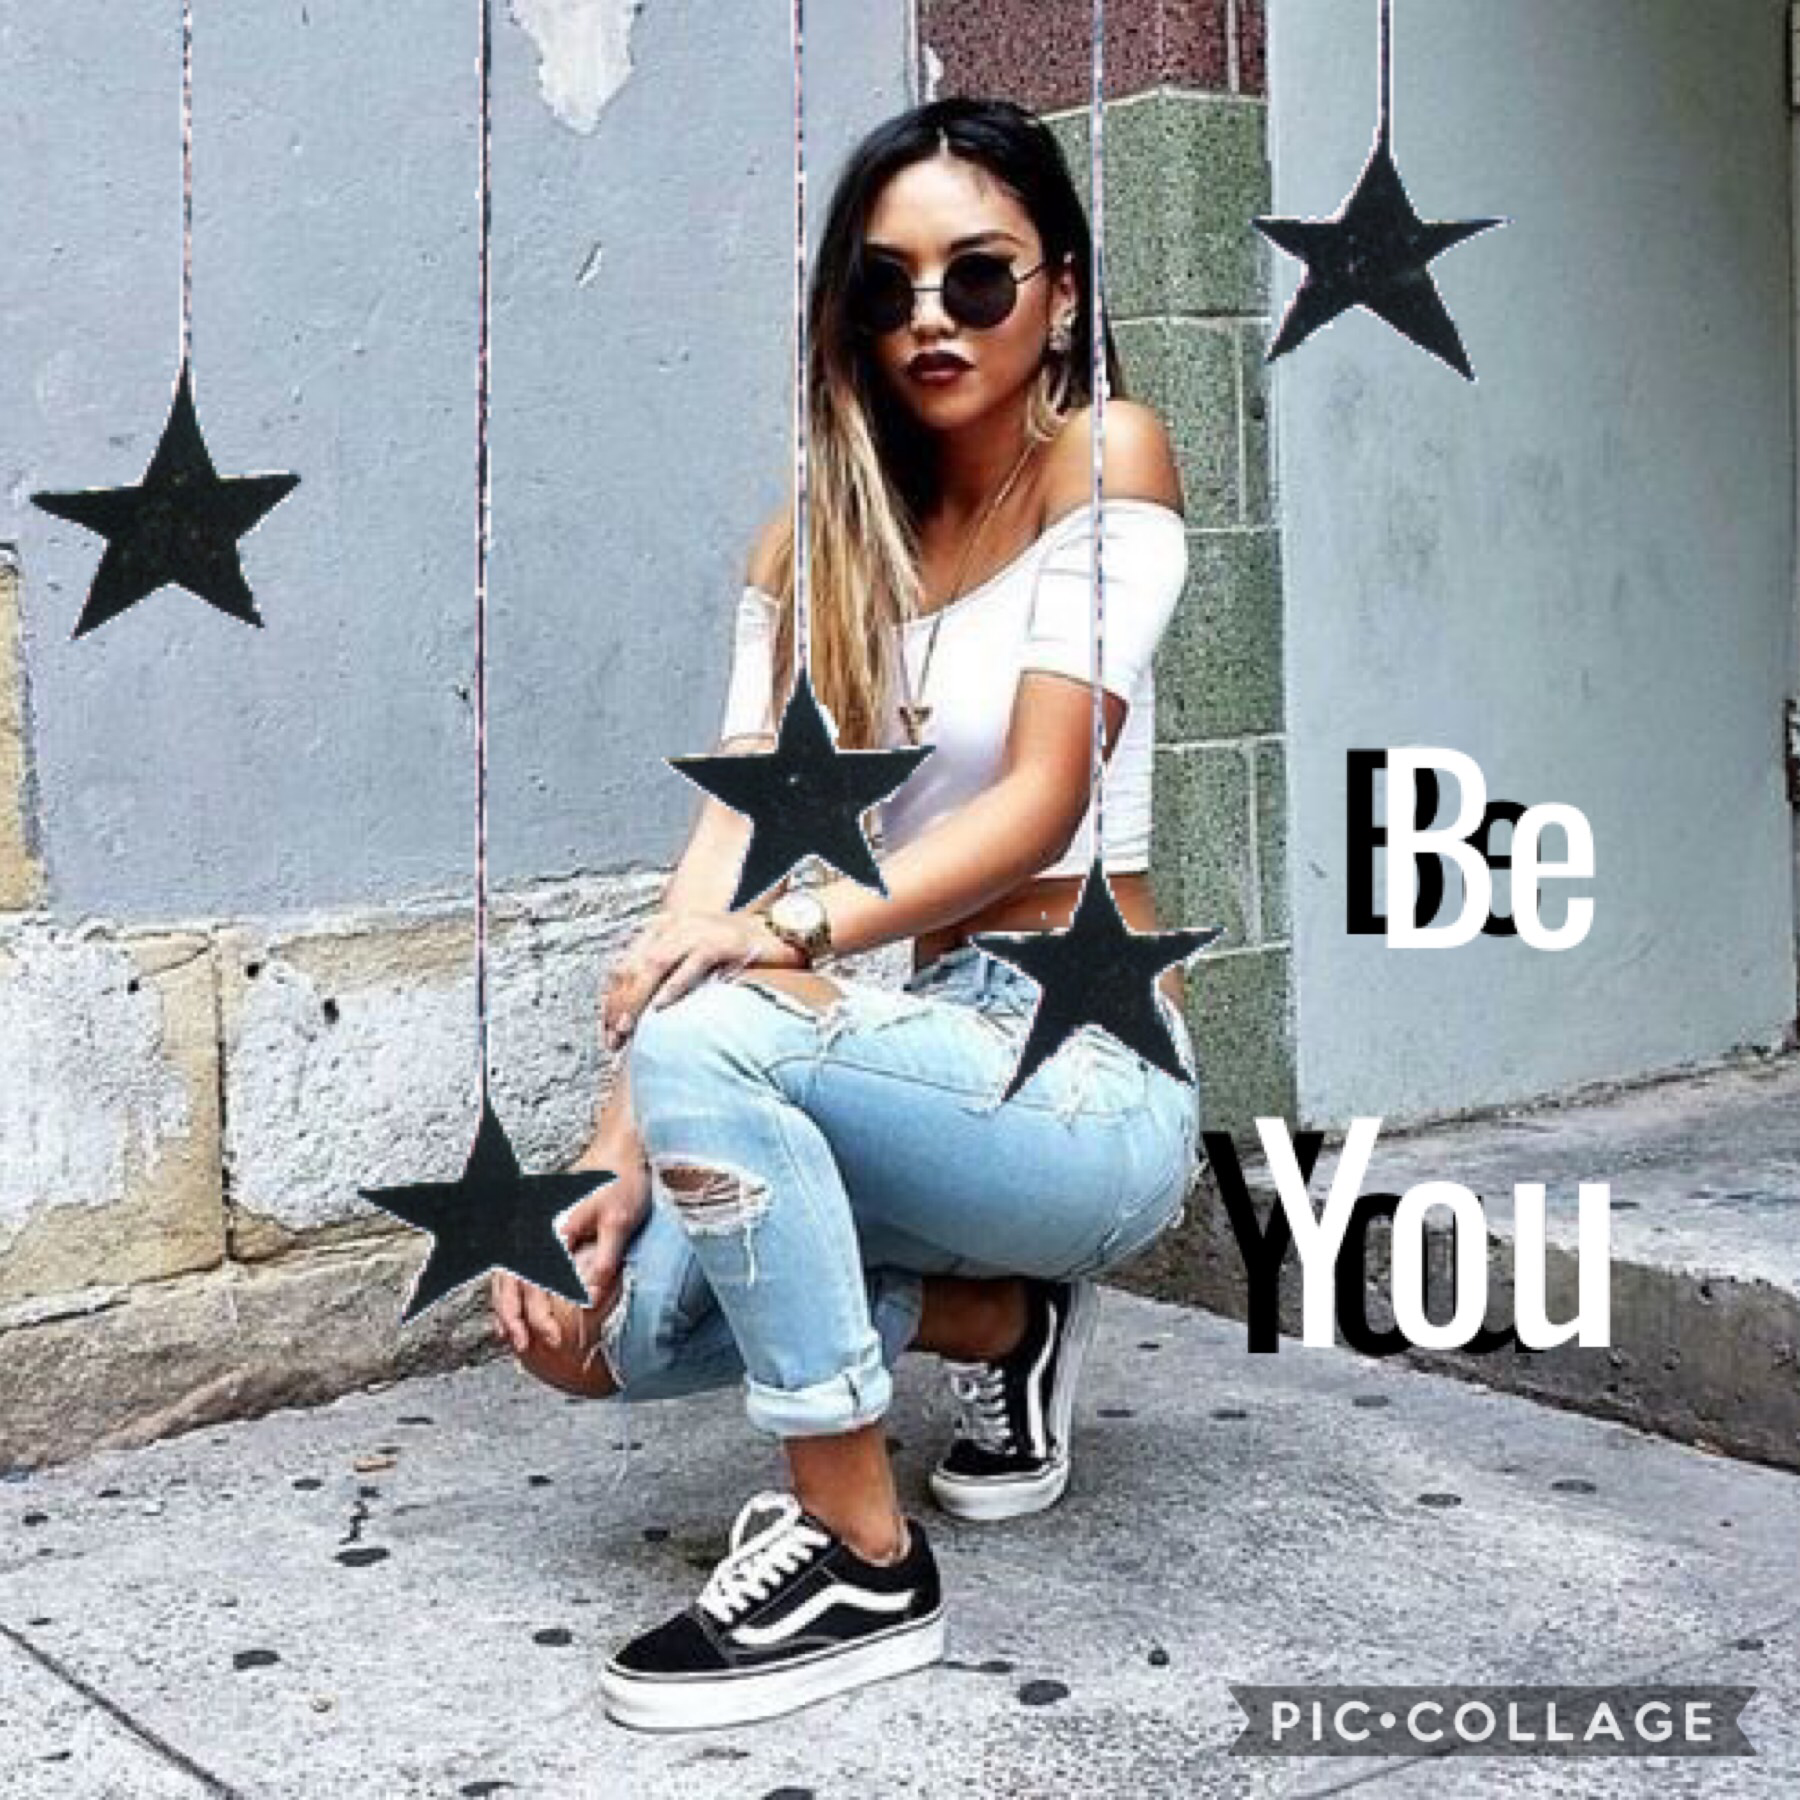 Be you! 😇